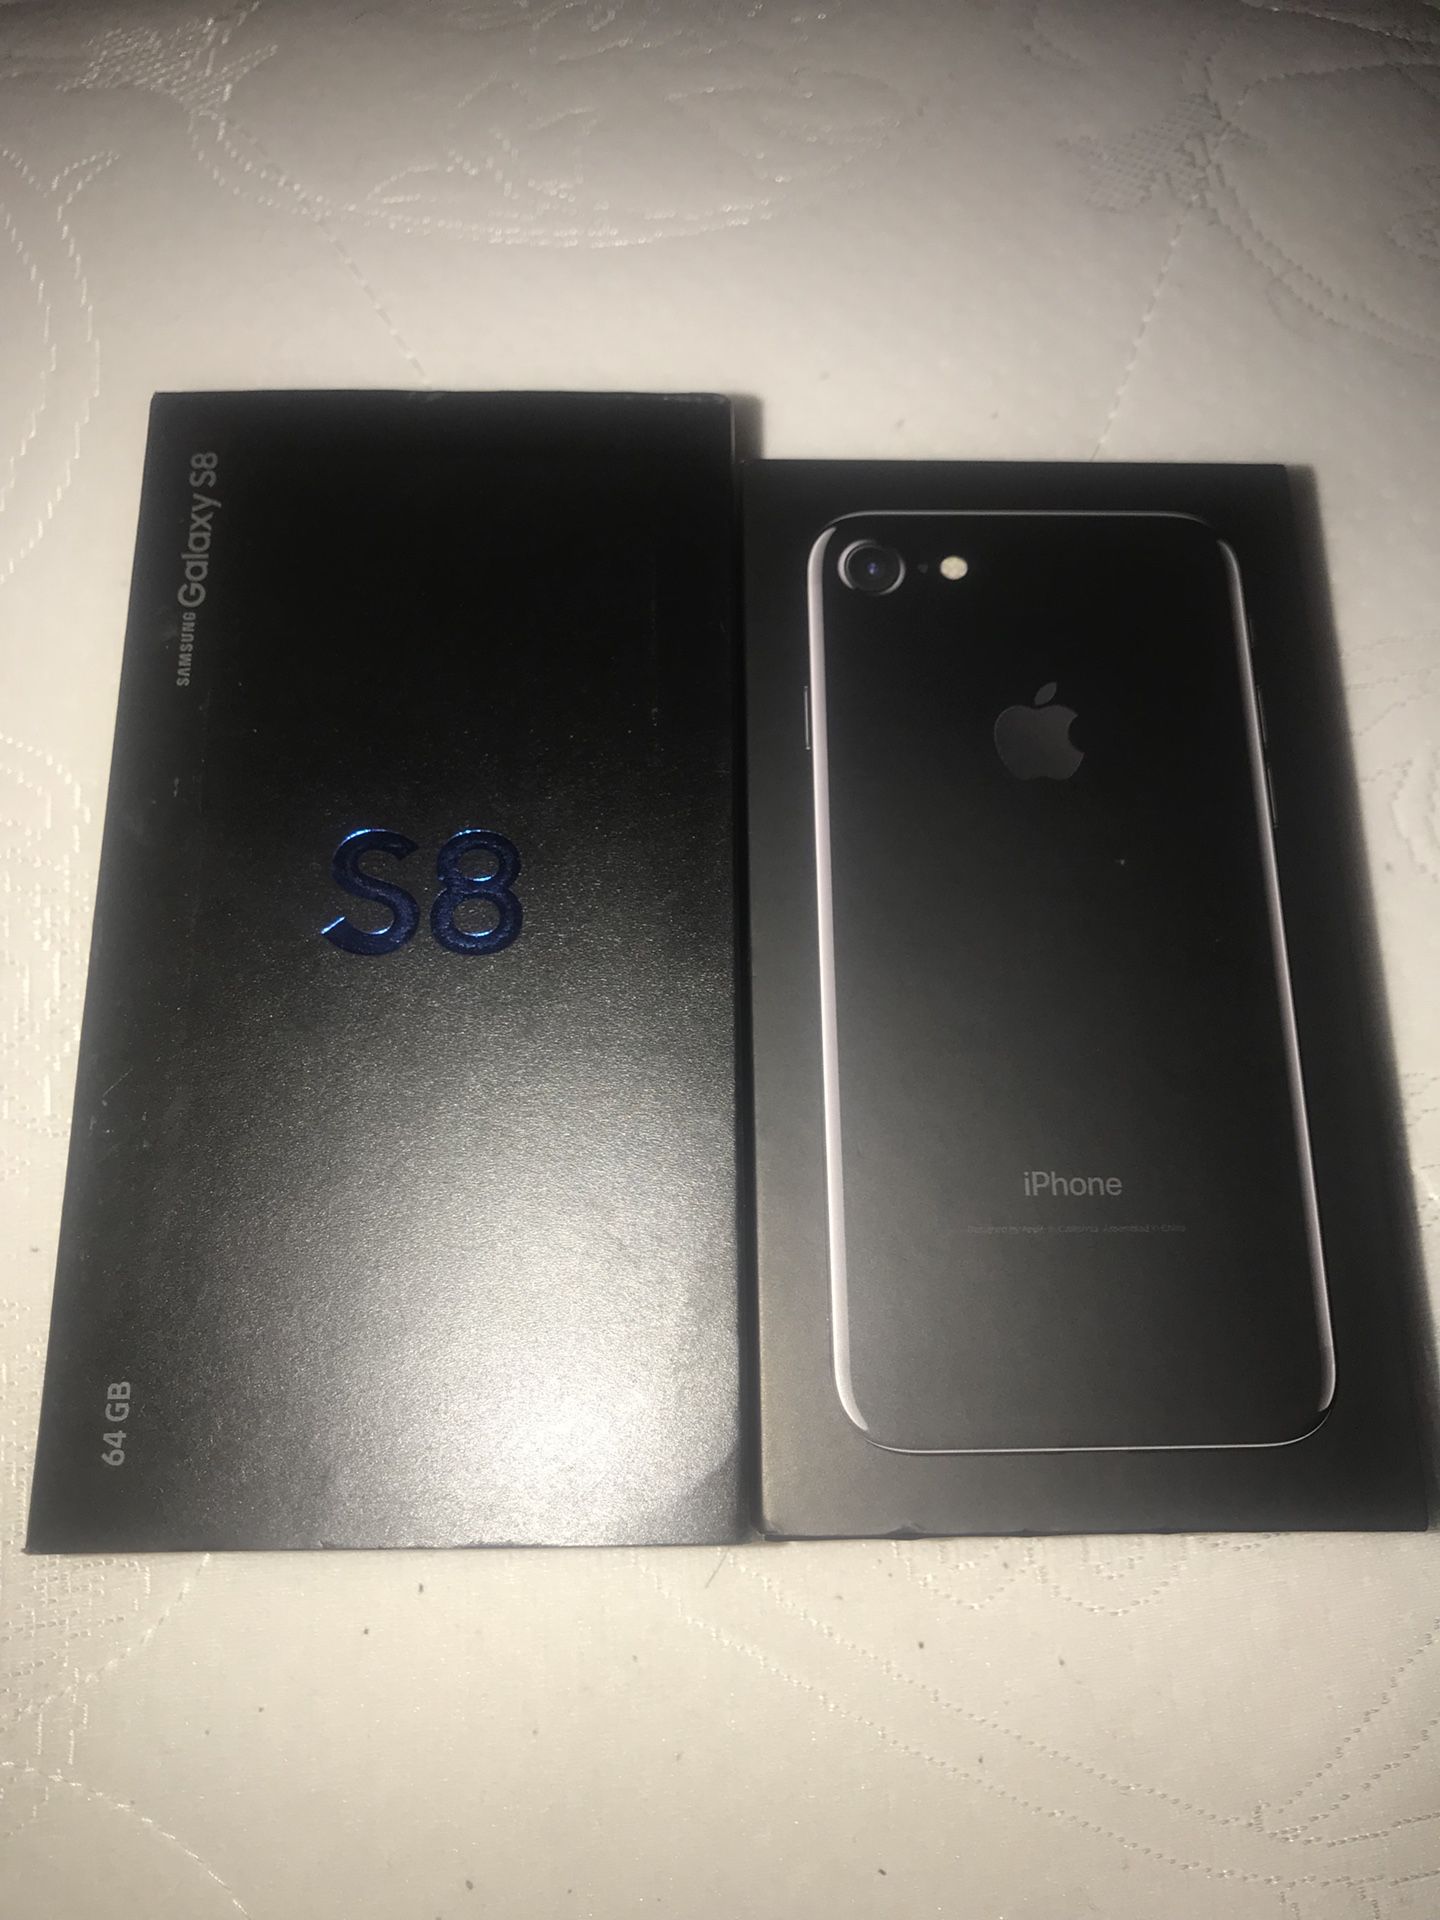 New iPhone 8 and Samsung Galaxy S8 for sale !!!